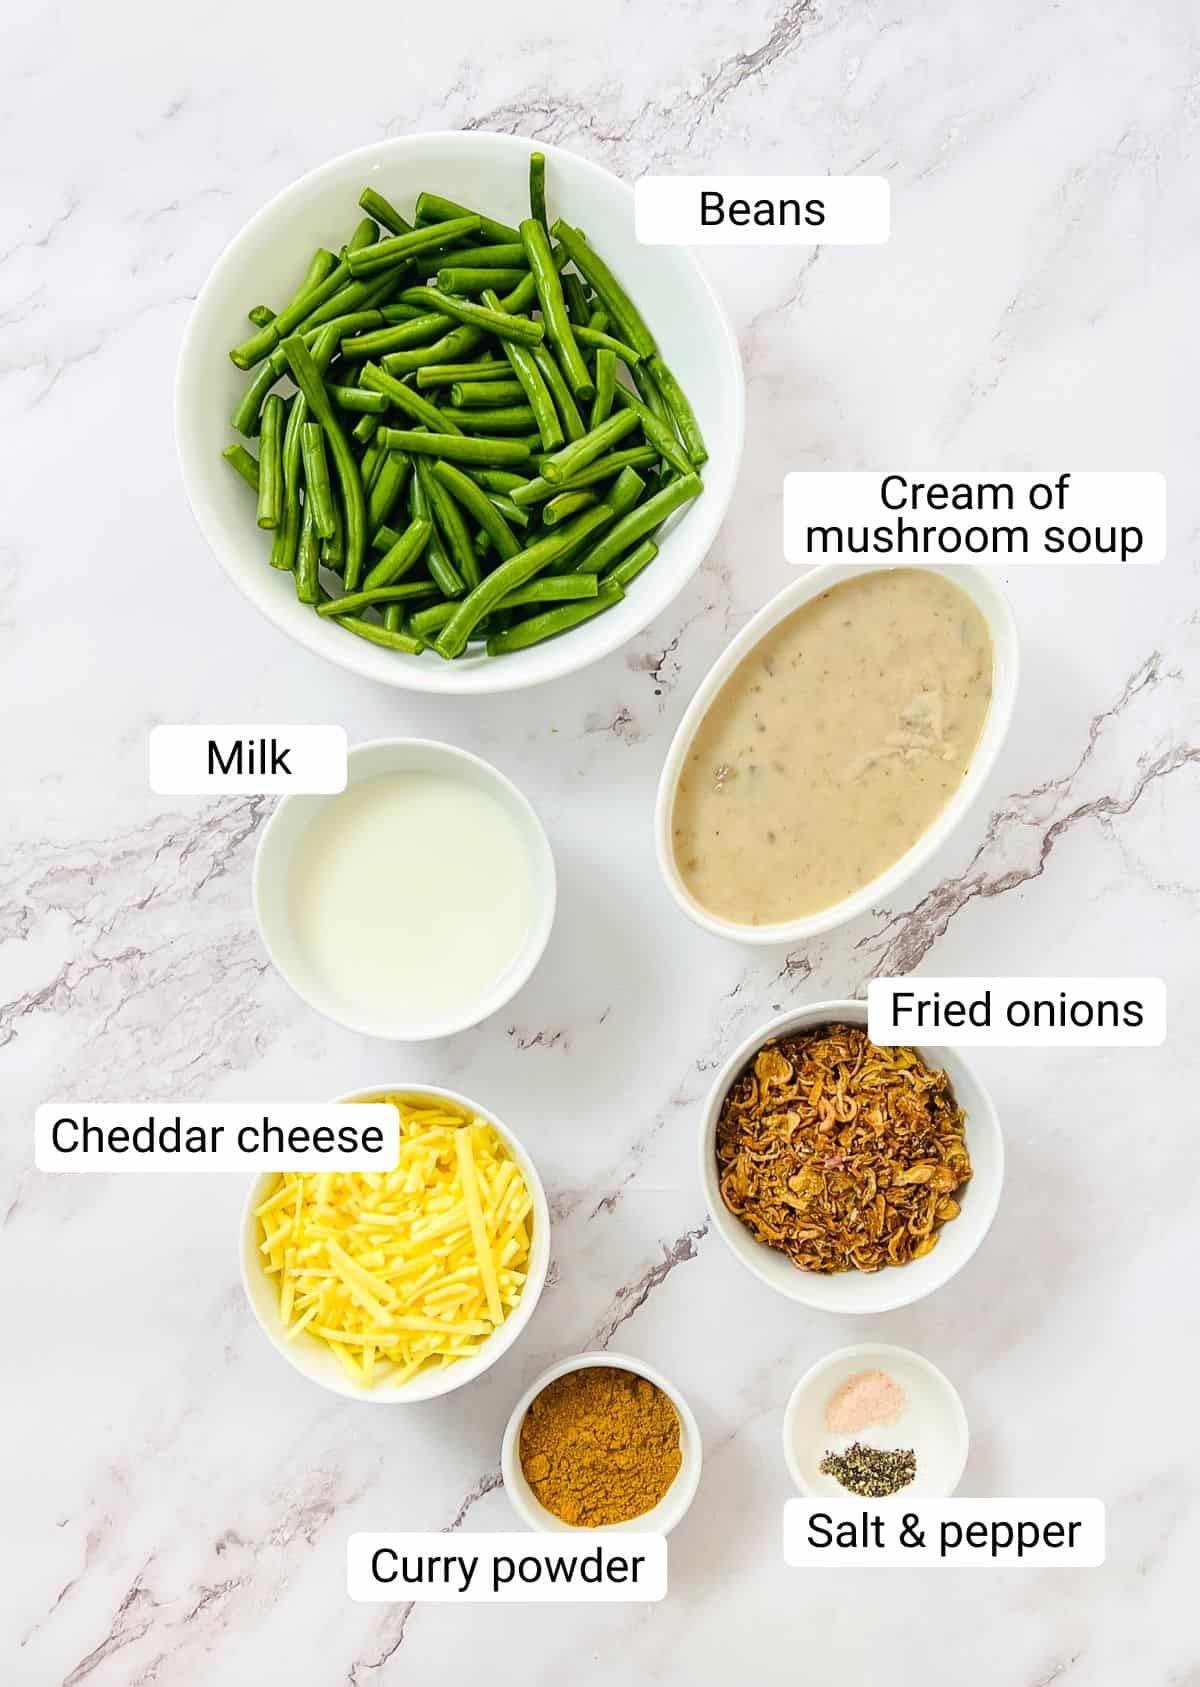 Ingredients to make green bean casserole placed on a marble surface.